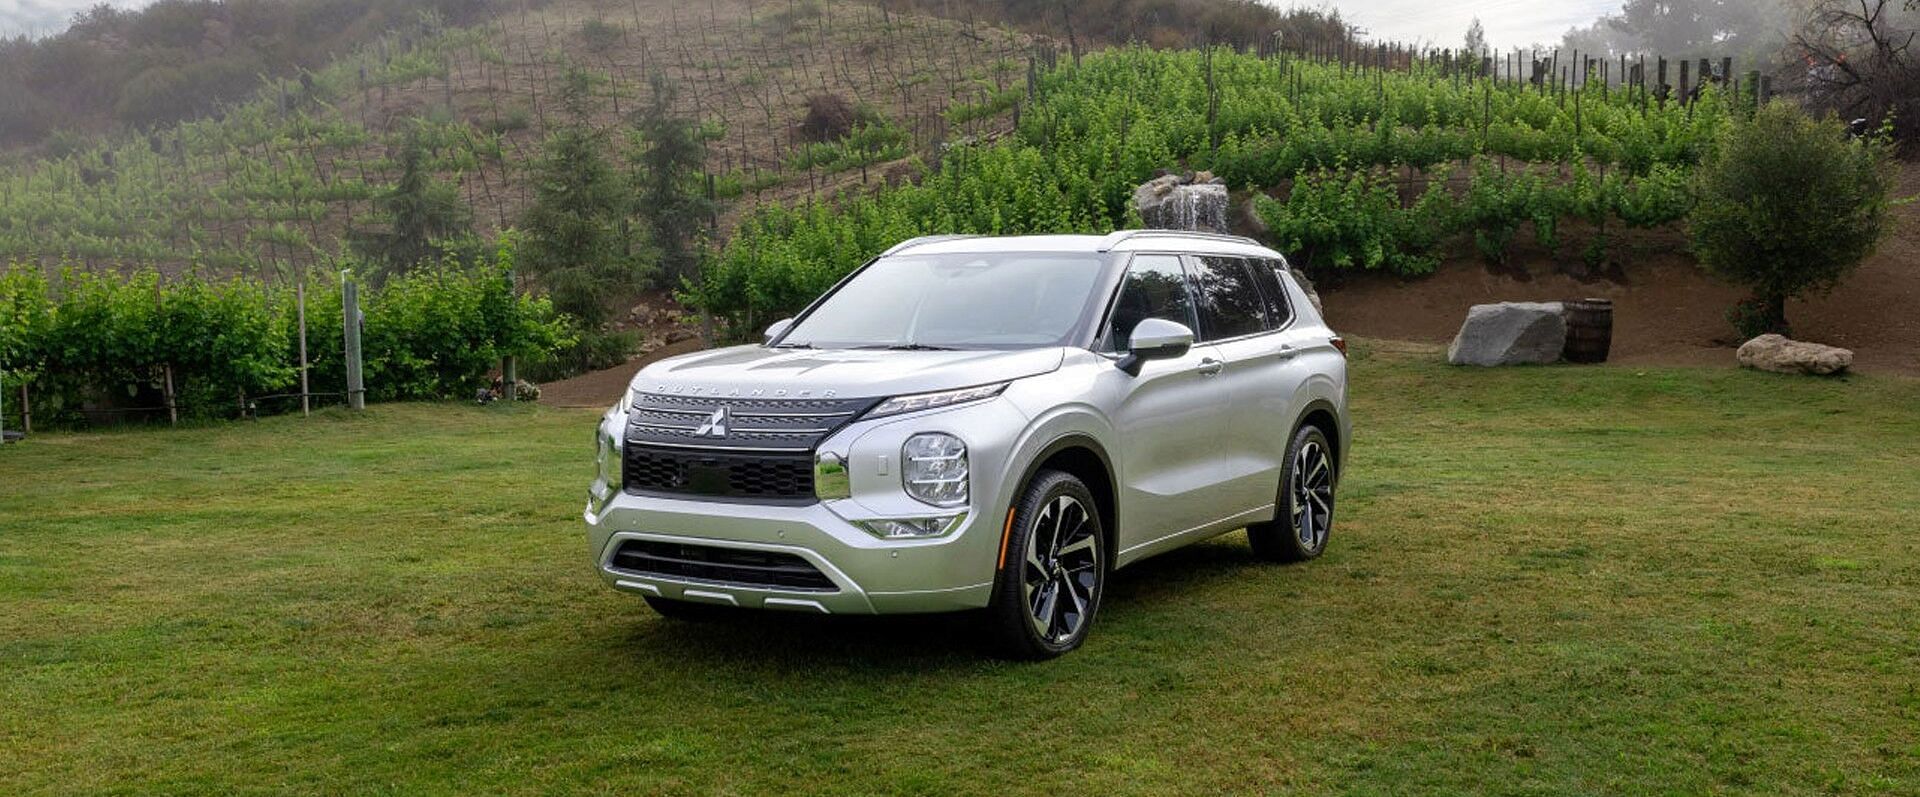 A silver 2023 mitsubishi outlander standing in a clearing. Hills in the background